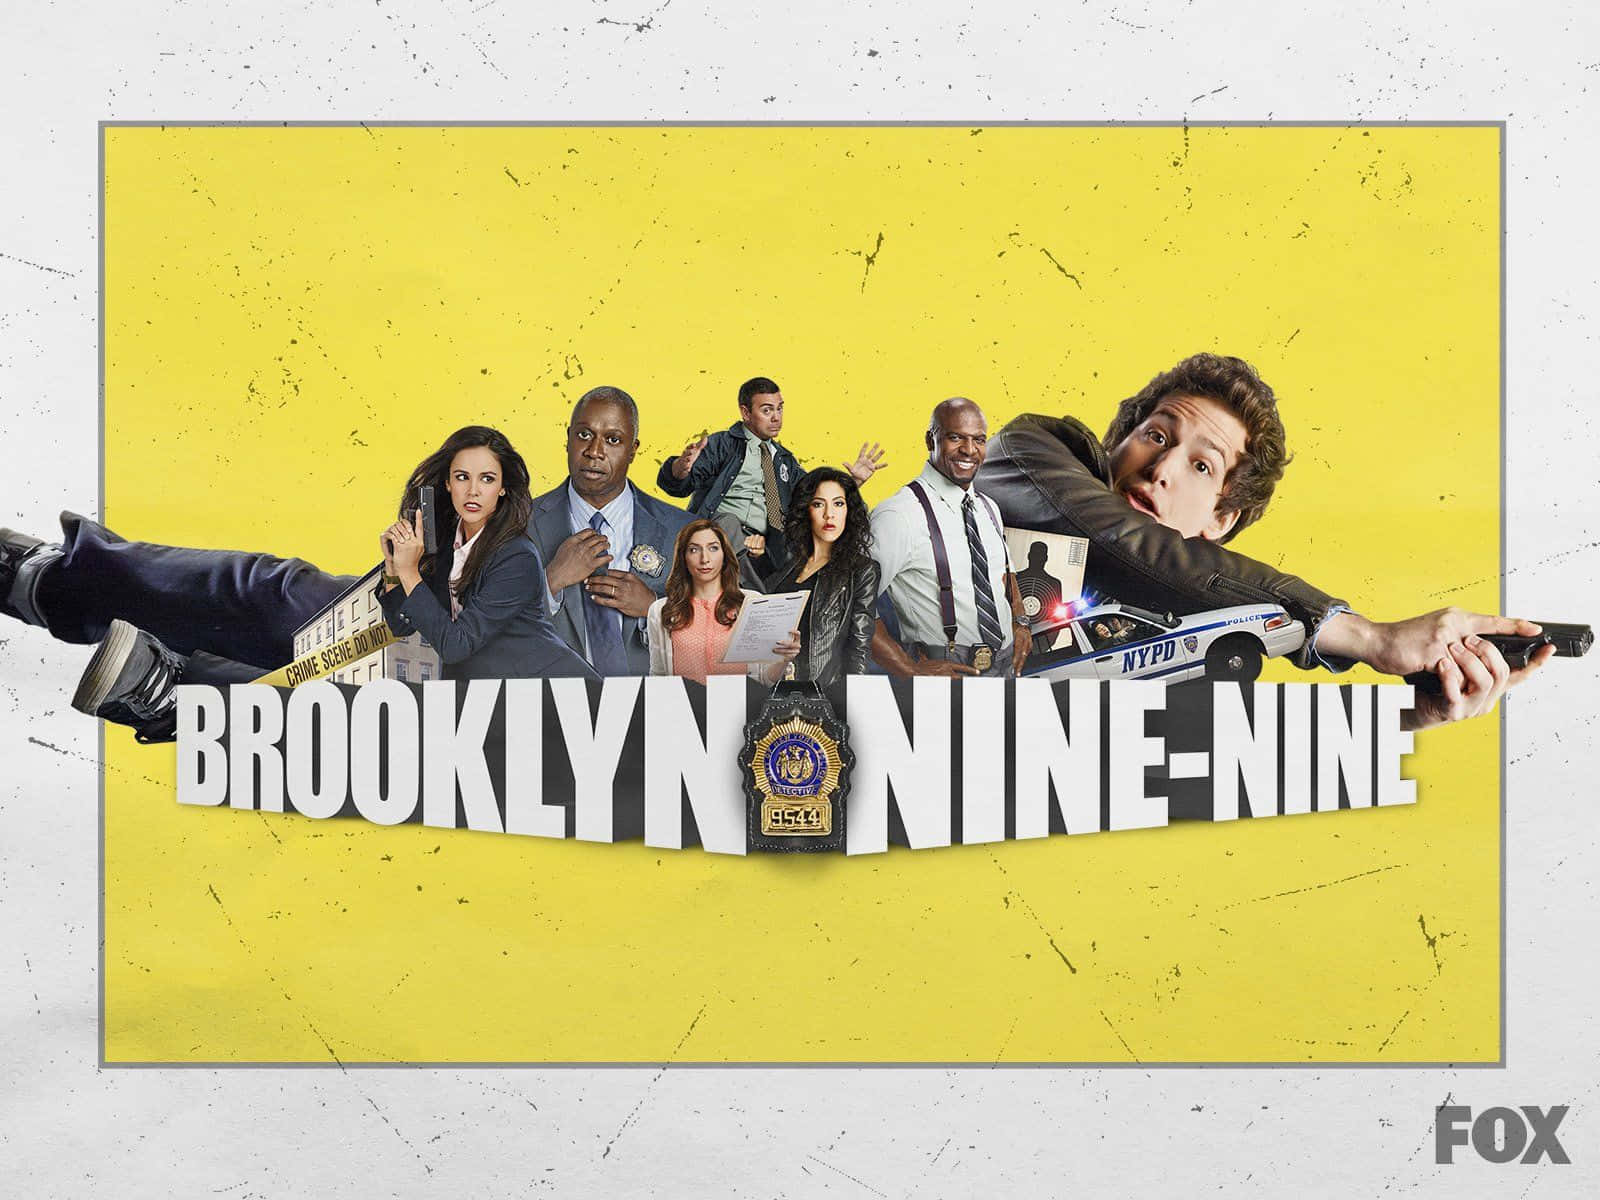 The Brooklyn Nine Nine Squad Ready for Action